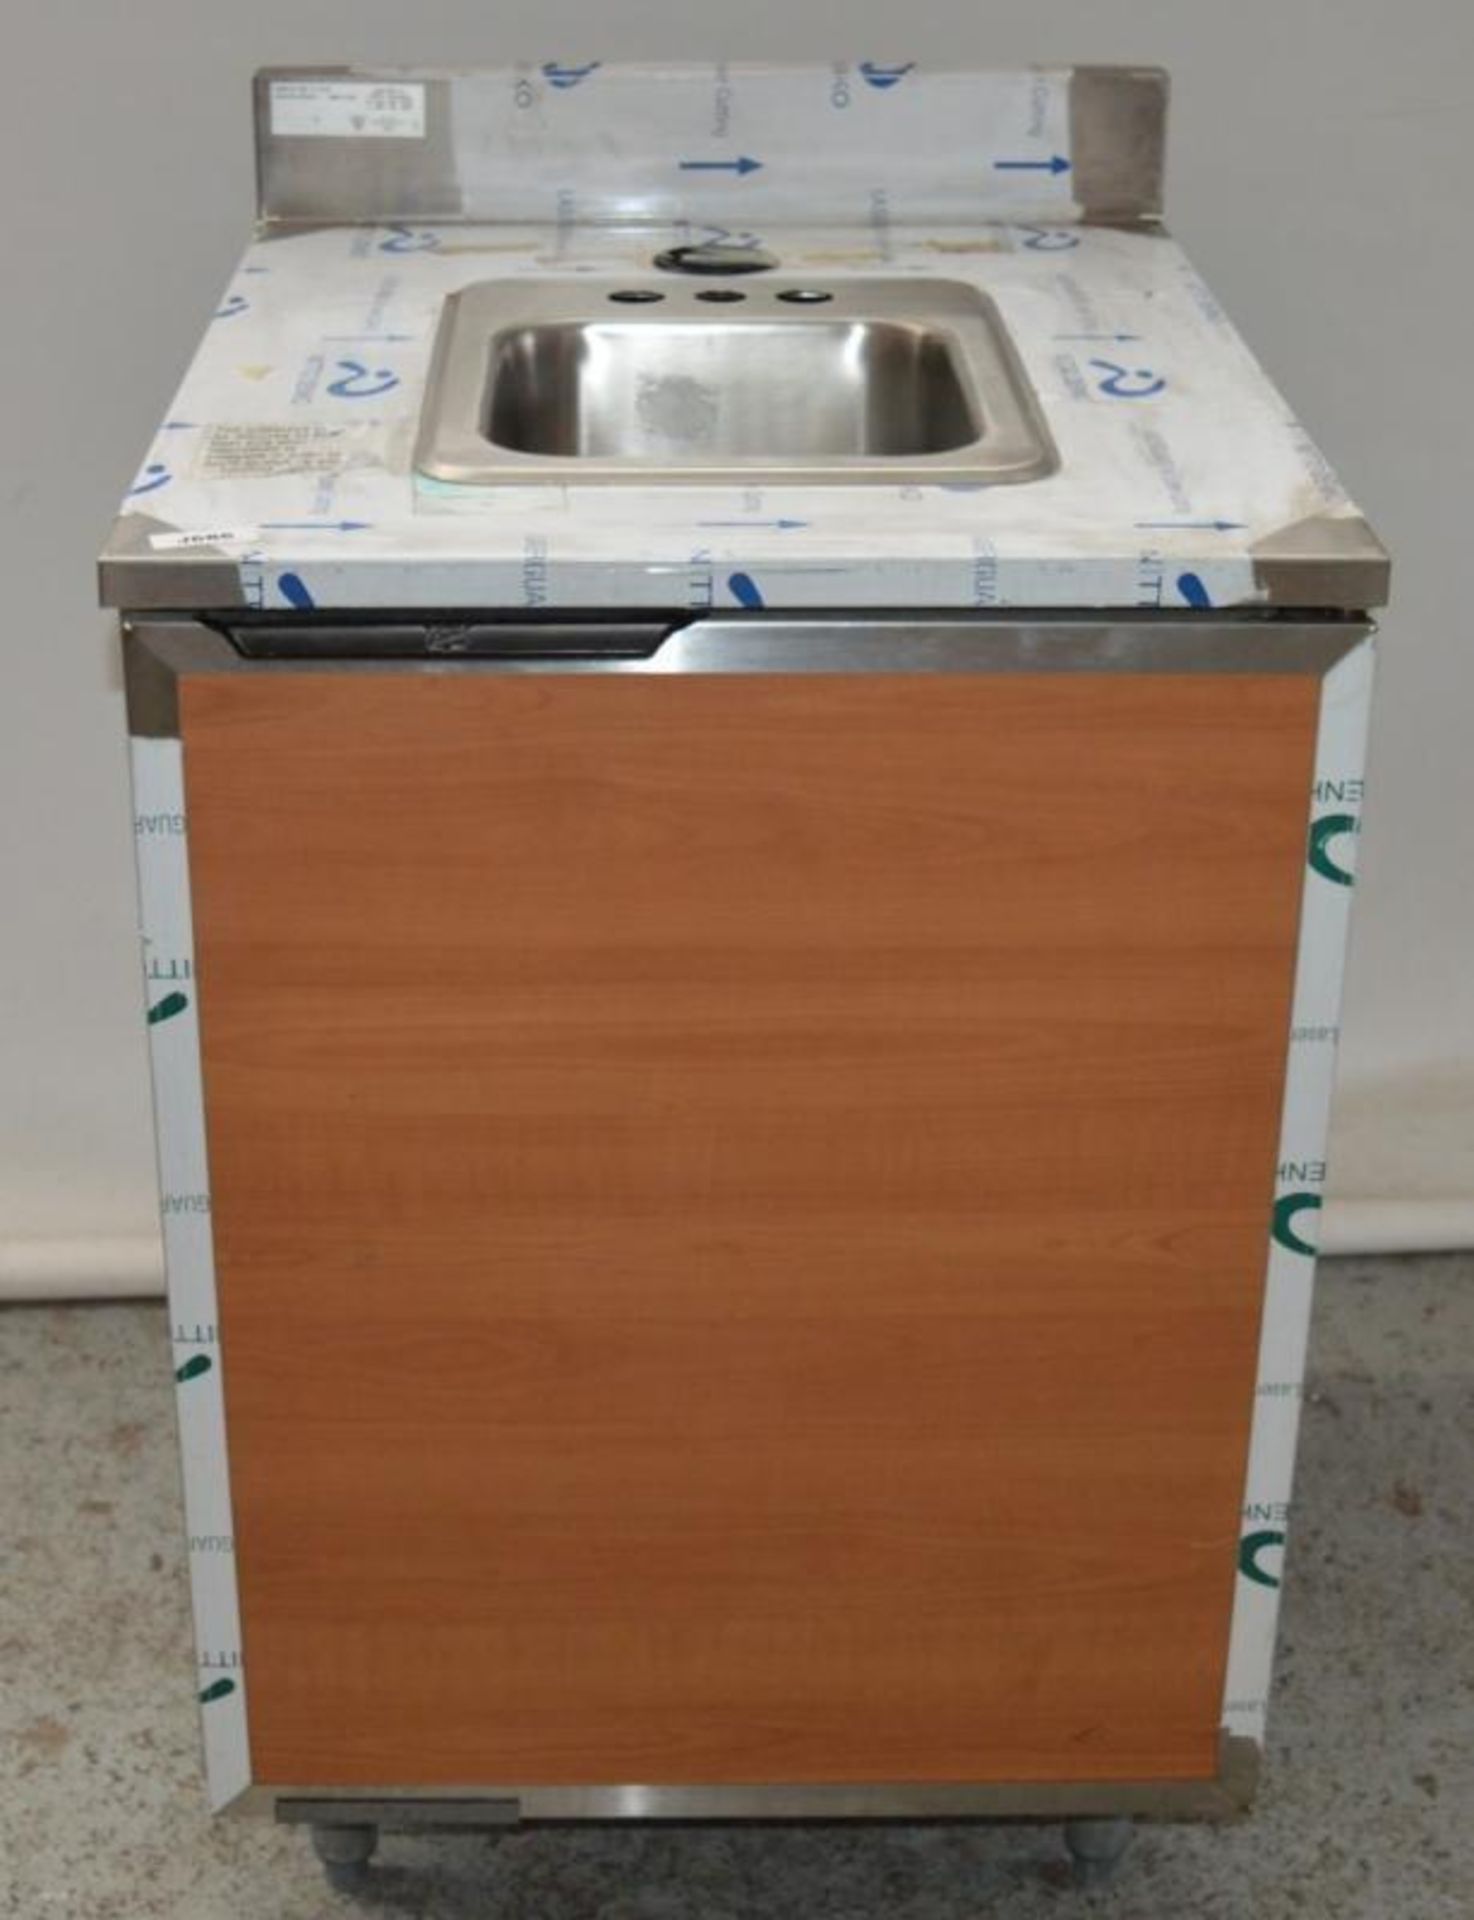 1 x Duke Stainless Steel Sink Basin Unit With Wood Finish Cabinet - Unused With Protective Film Atta - Image 3 of 7